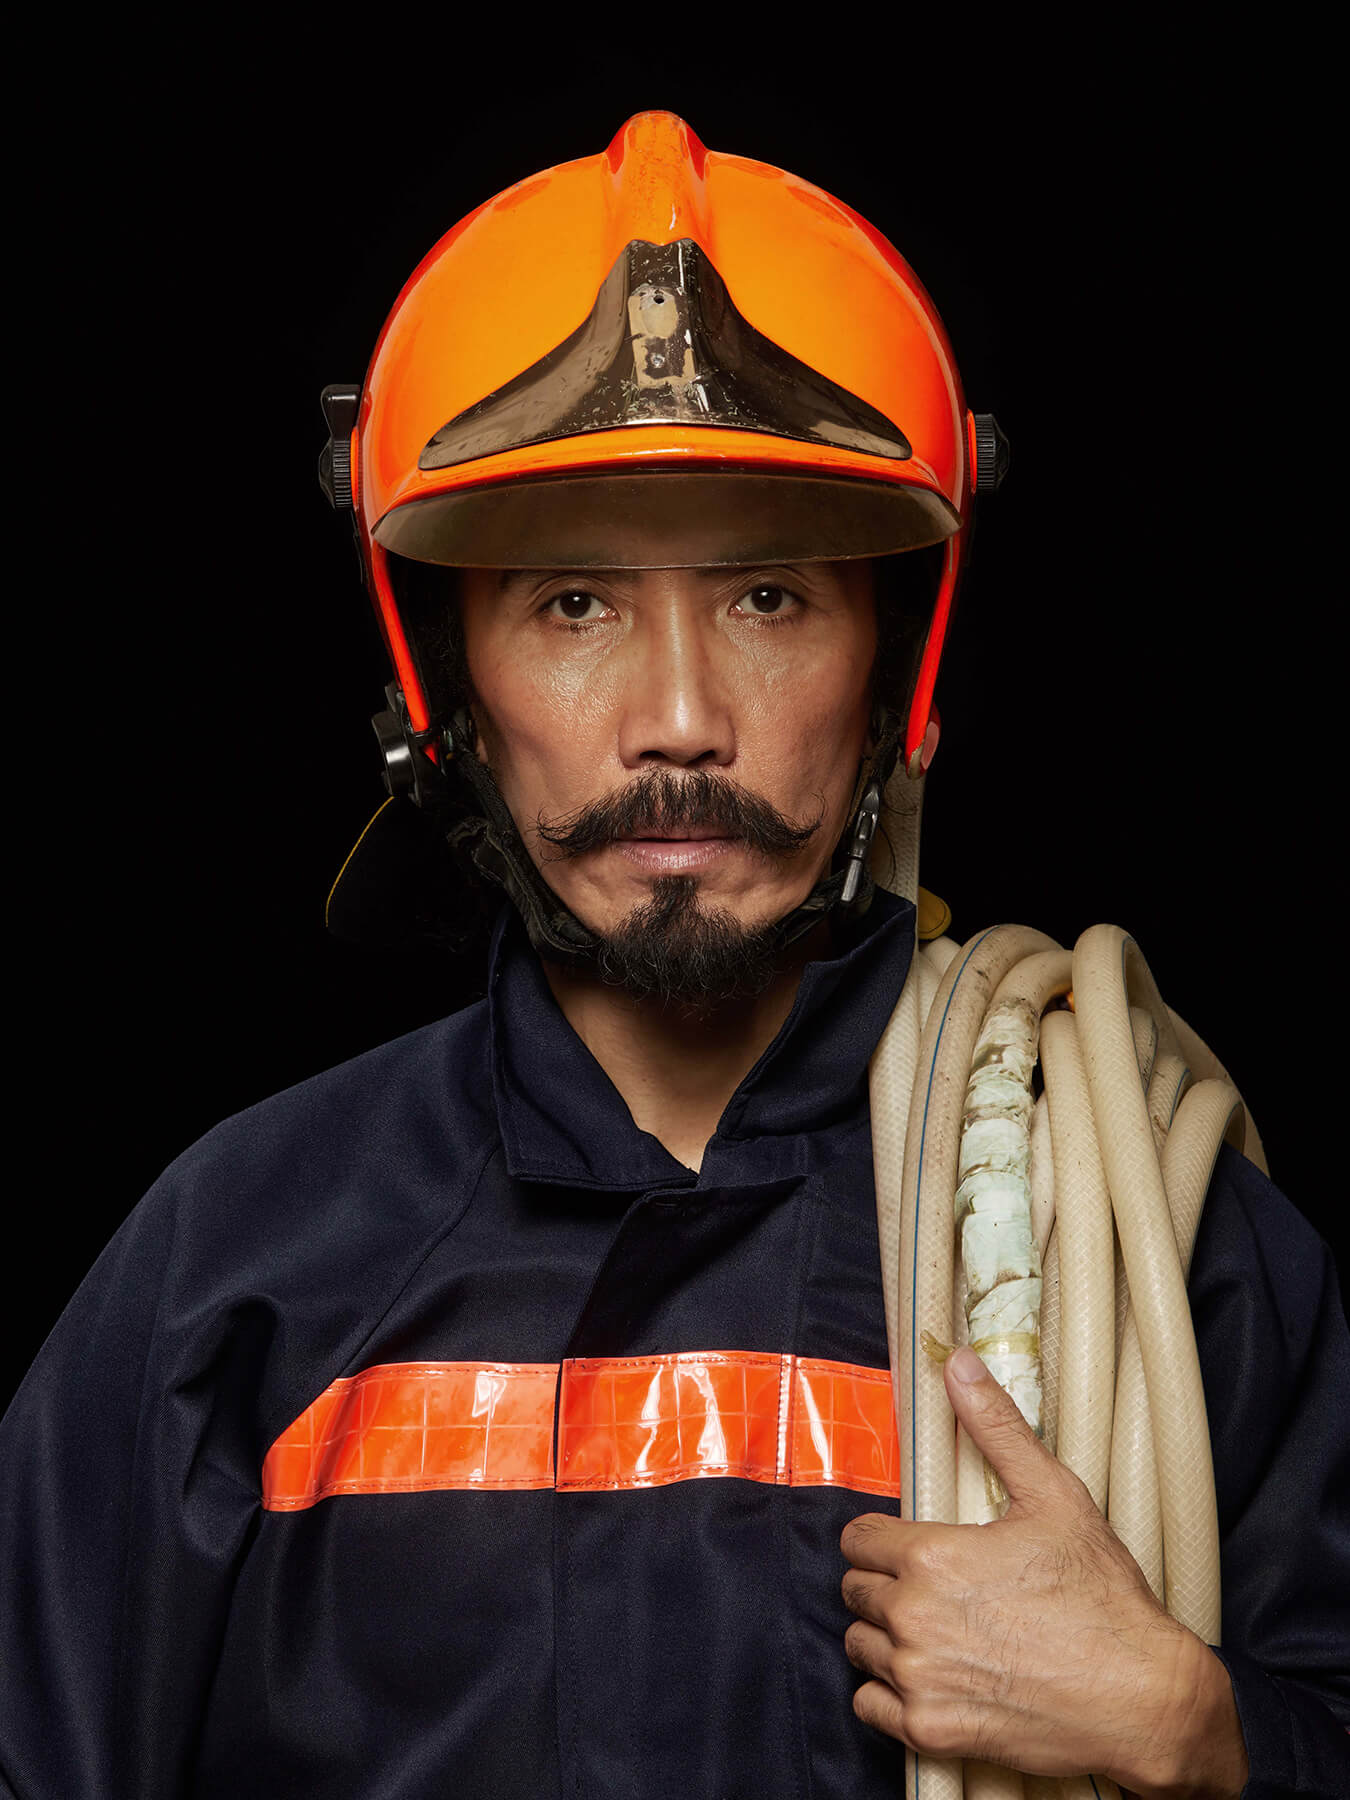 16 Oct 2017 A Salute to firefighters: Derong is photographed as a firefighter